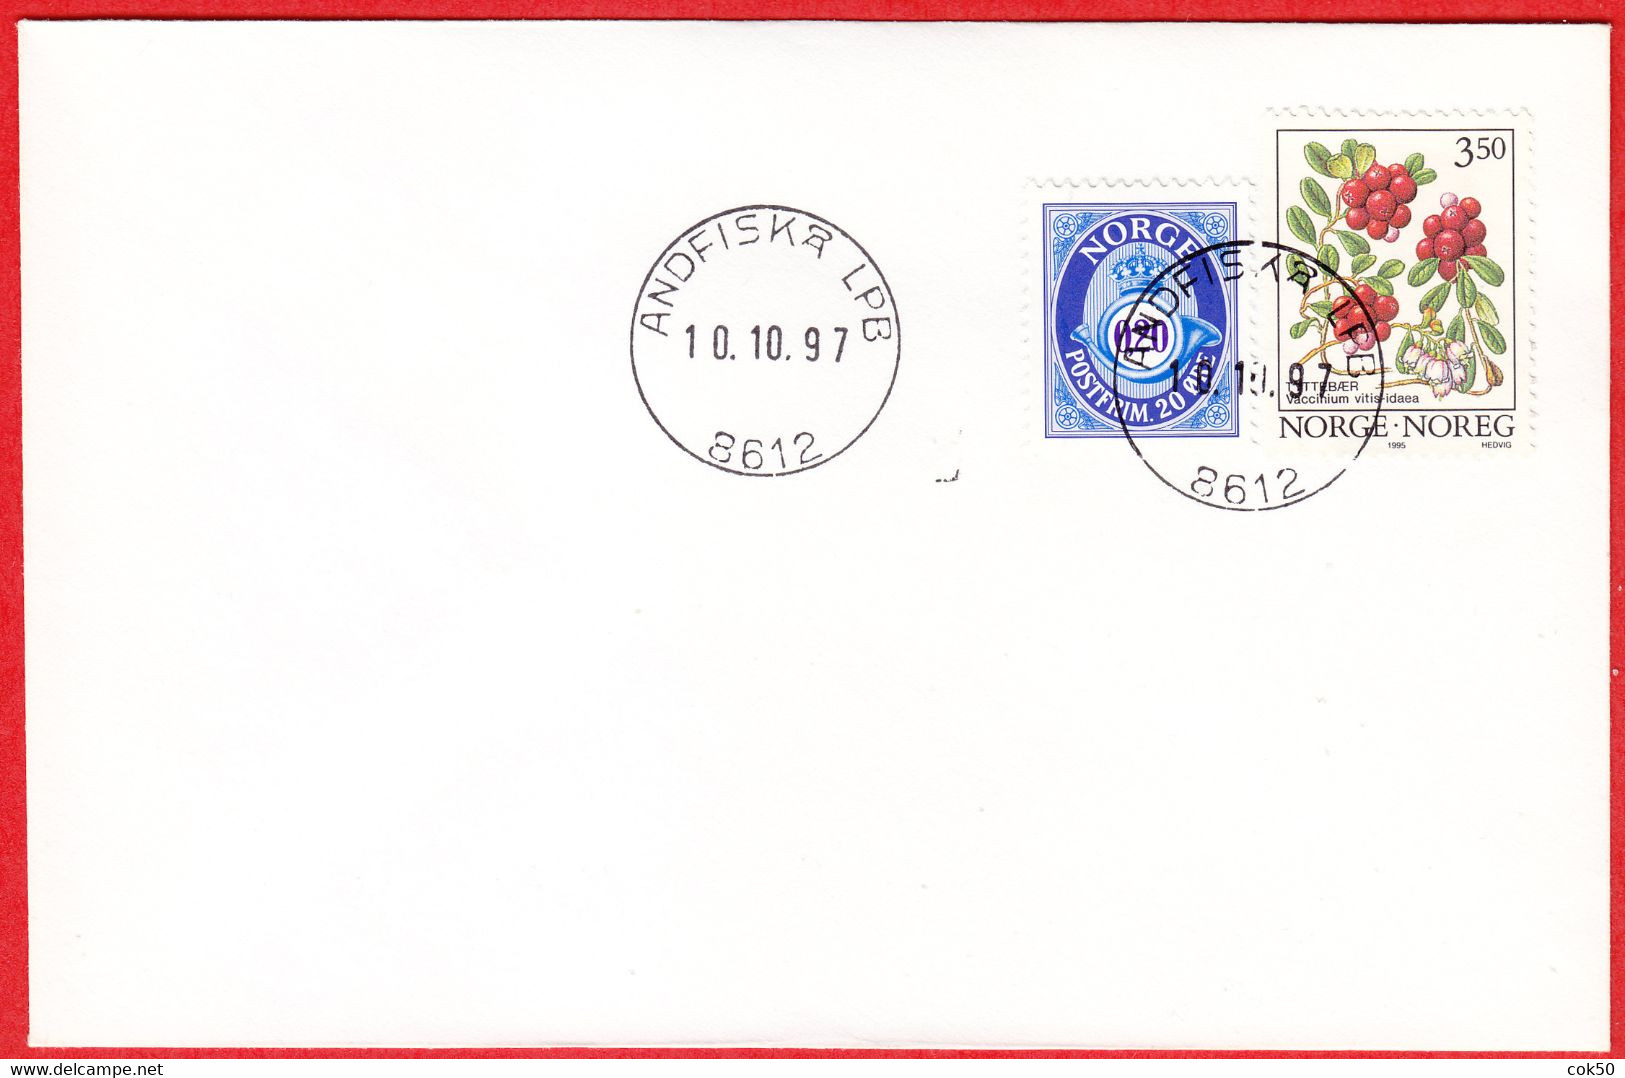 NORWAY -  8612 ANDFISKÅ LPB - 24 MmØ - (Nordland County) - Last Day/postoffice Closed On 1997.10.10 - Local Post Stamps